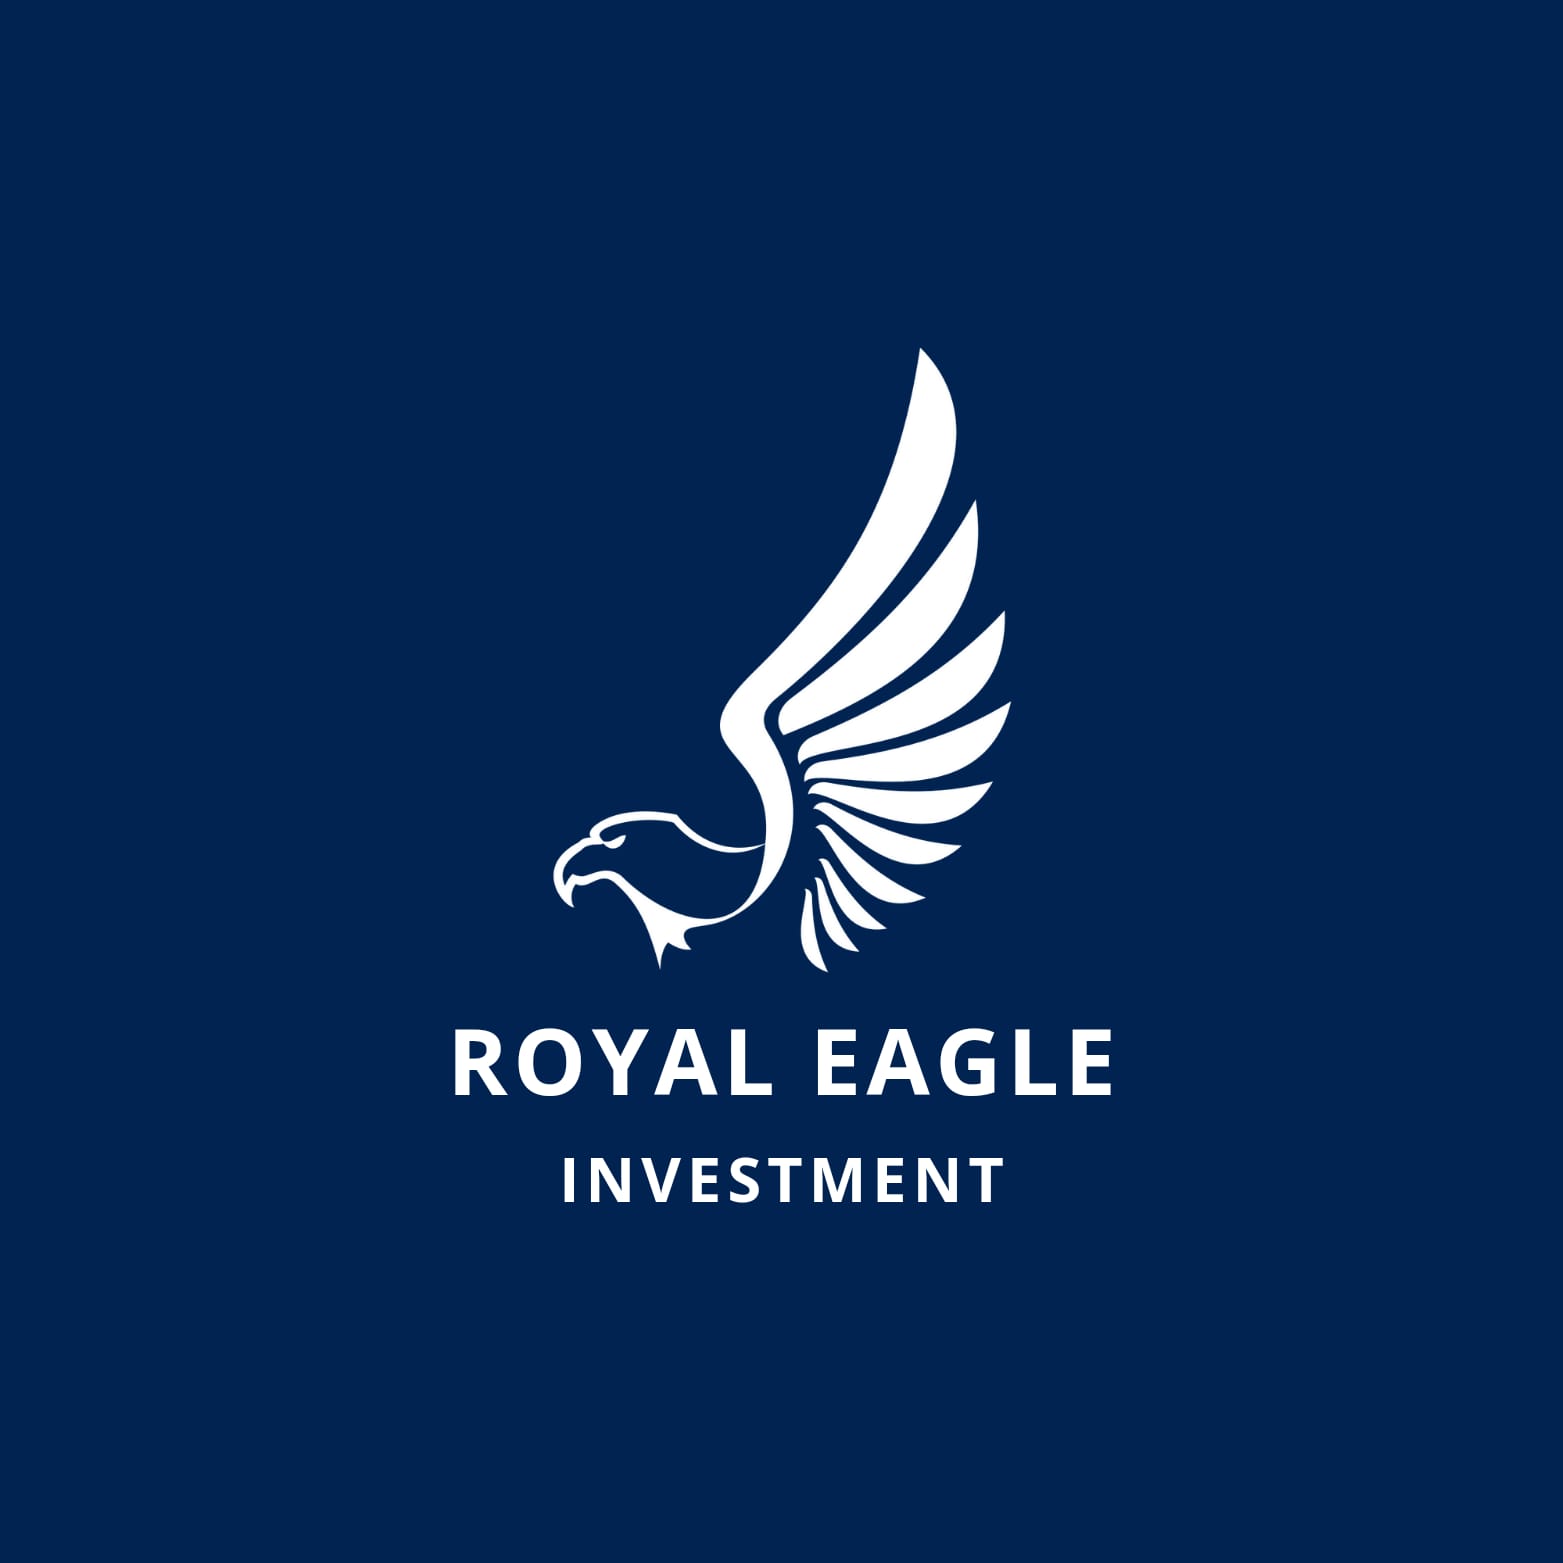 The royal eagle investment logo.